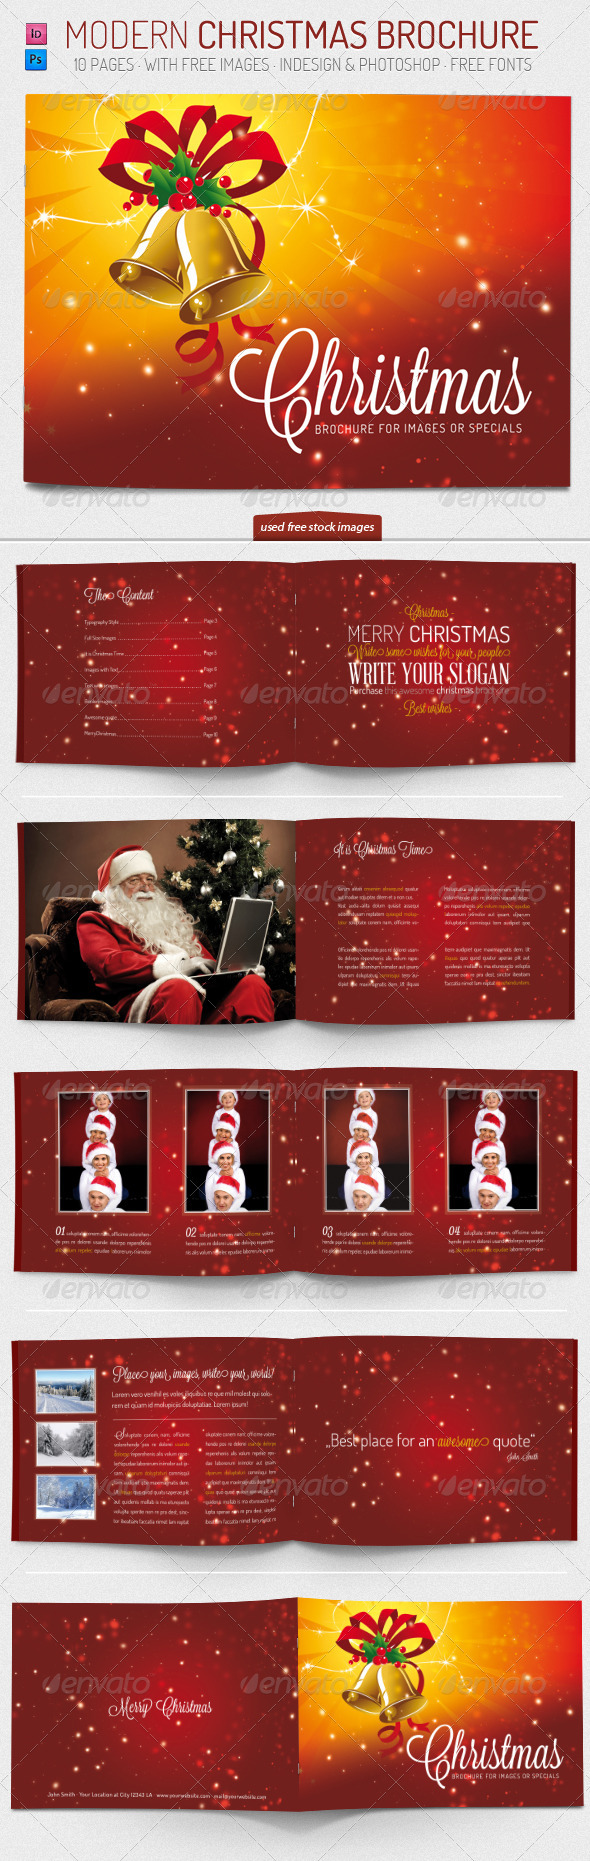 christmas-brochure-template-by-foos-graphicriver